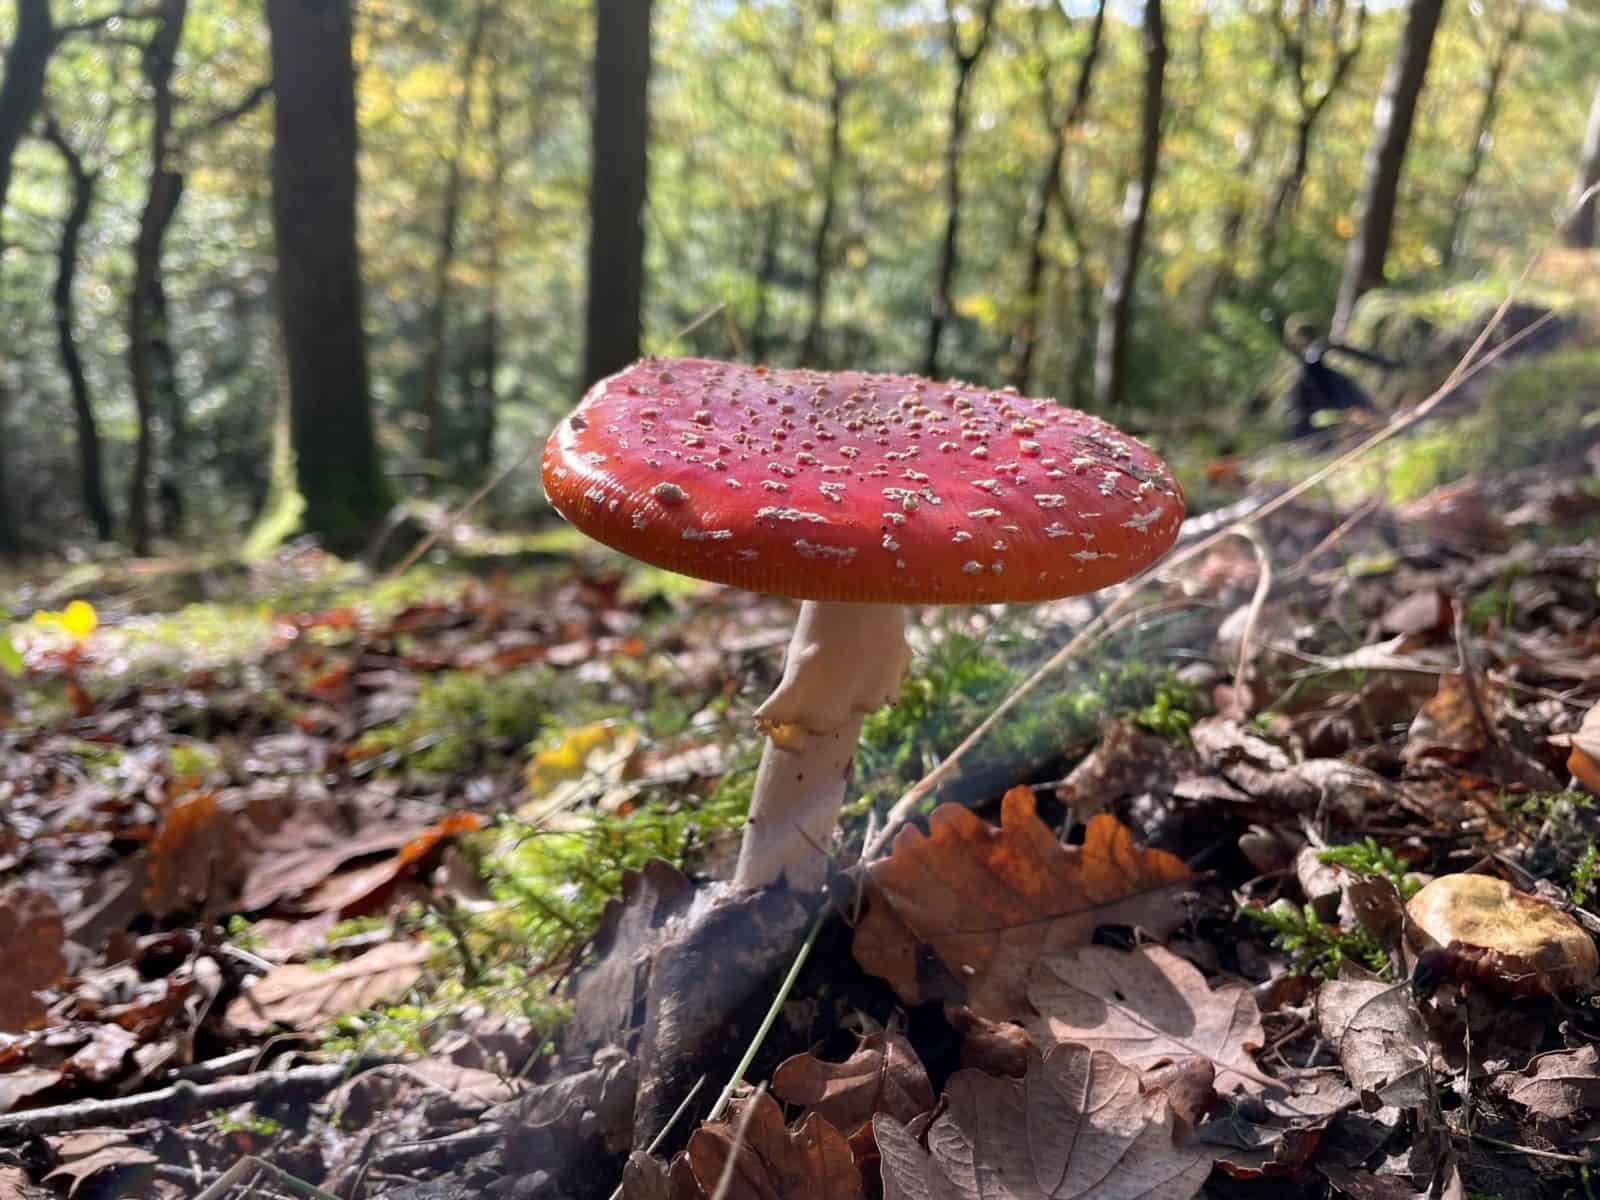 red fly agaric growing in a wood surrounded by leaves